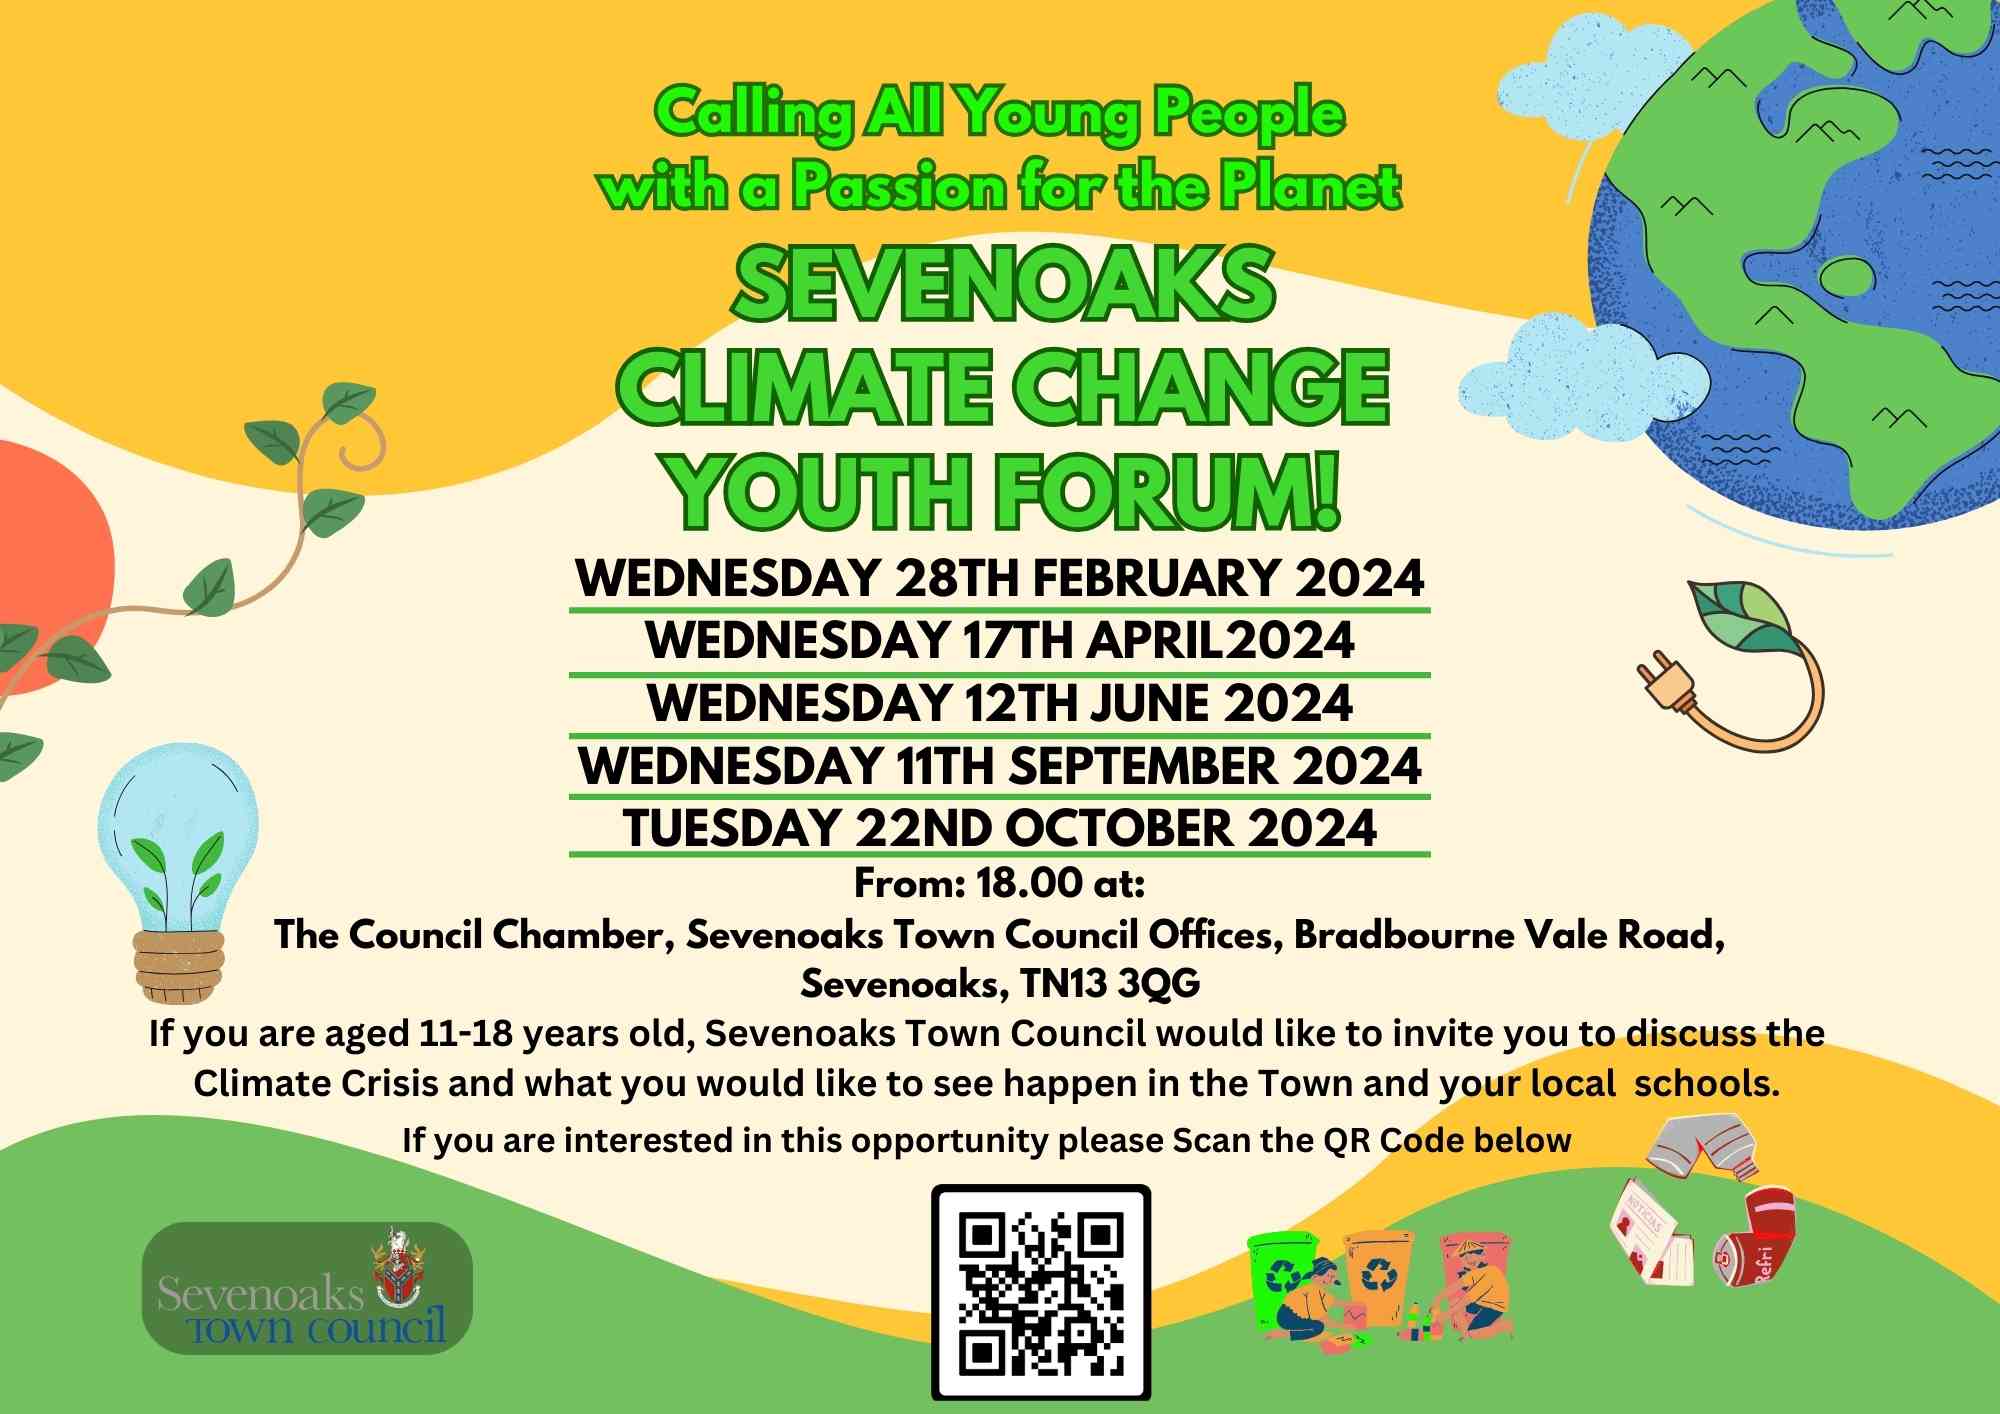 Poster showing the dates and times of the Sevenoaks Town Councils Climate Change Youth Forum held at the Town Council Chamber